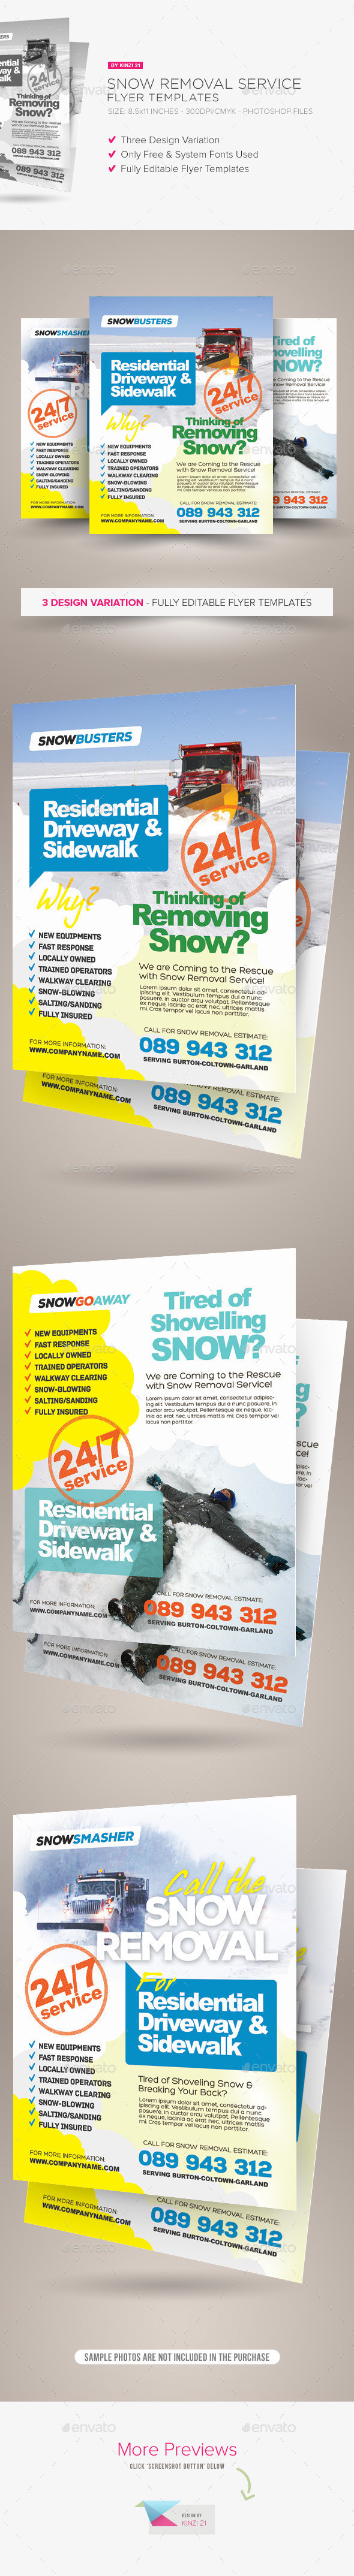 Graphic river snow removal service flyers kinzi21